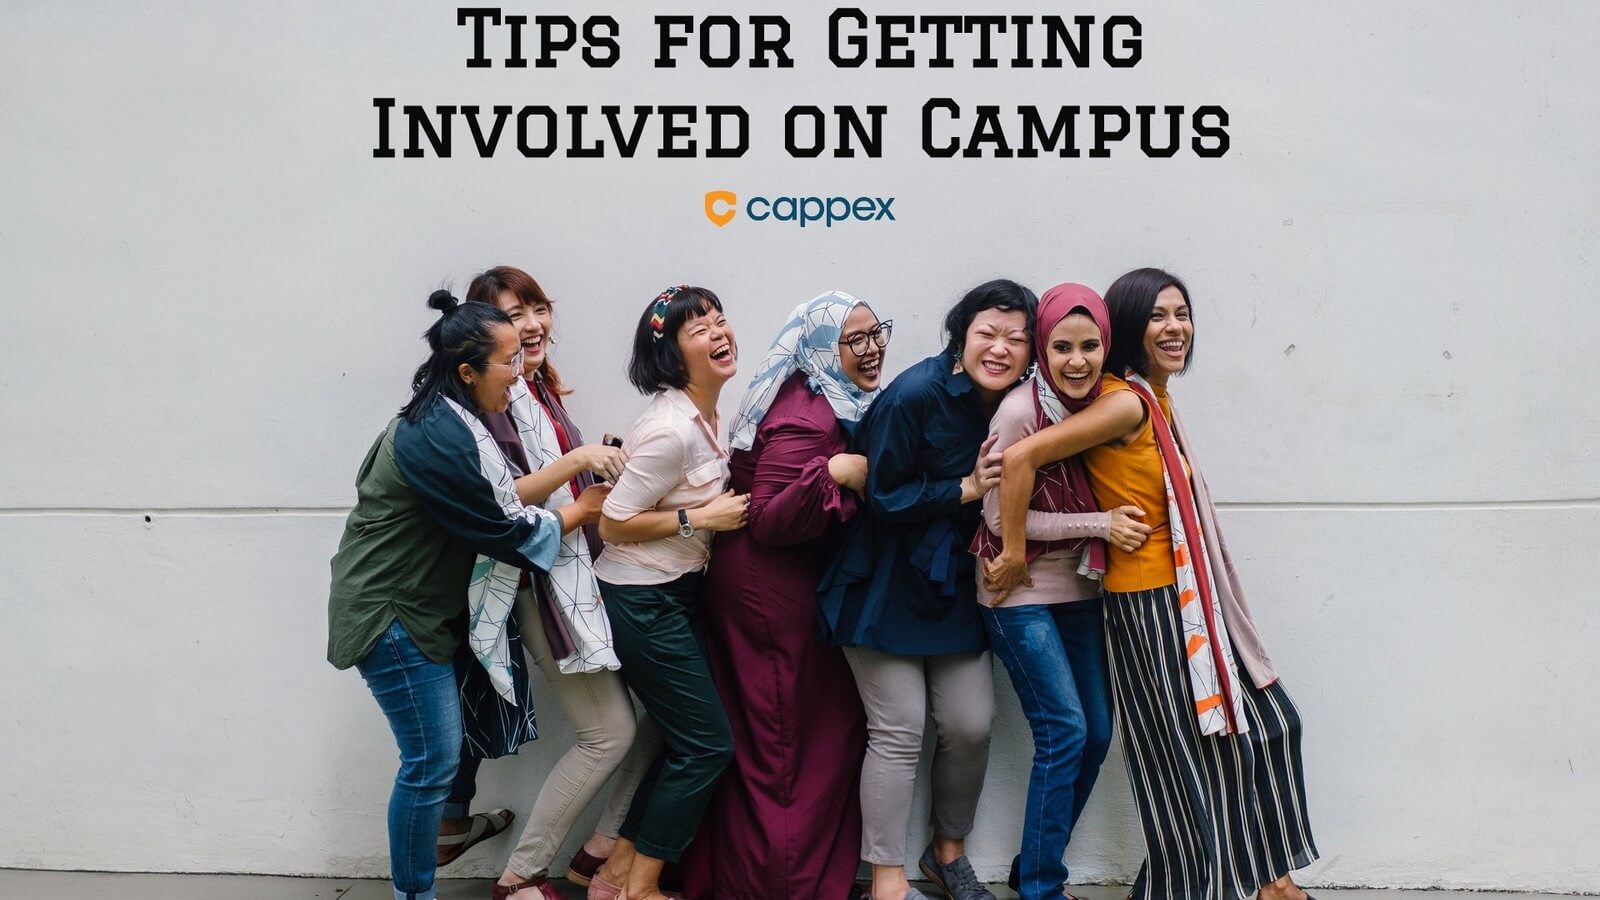 Tips for Getting Involved on Campus